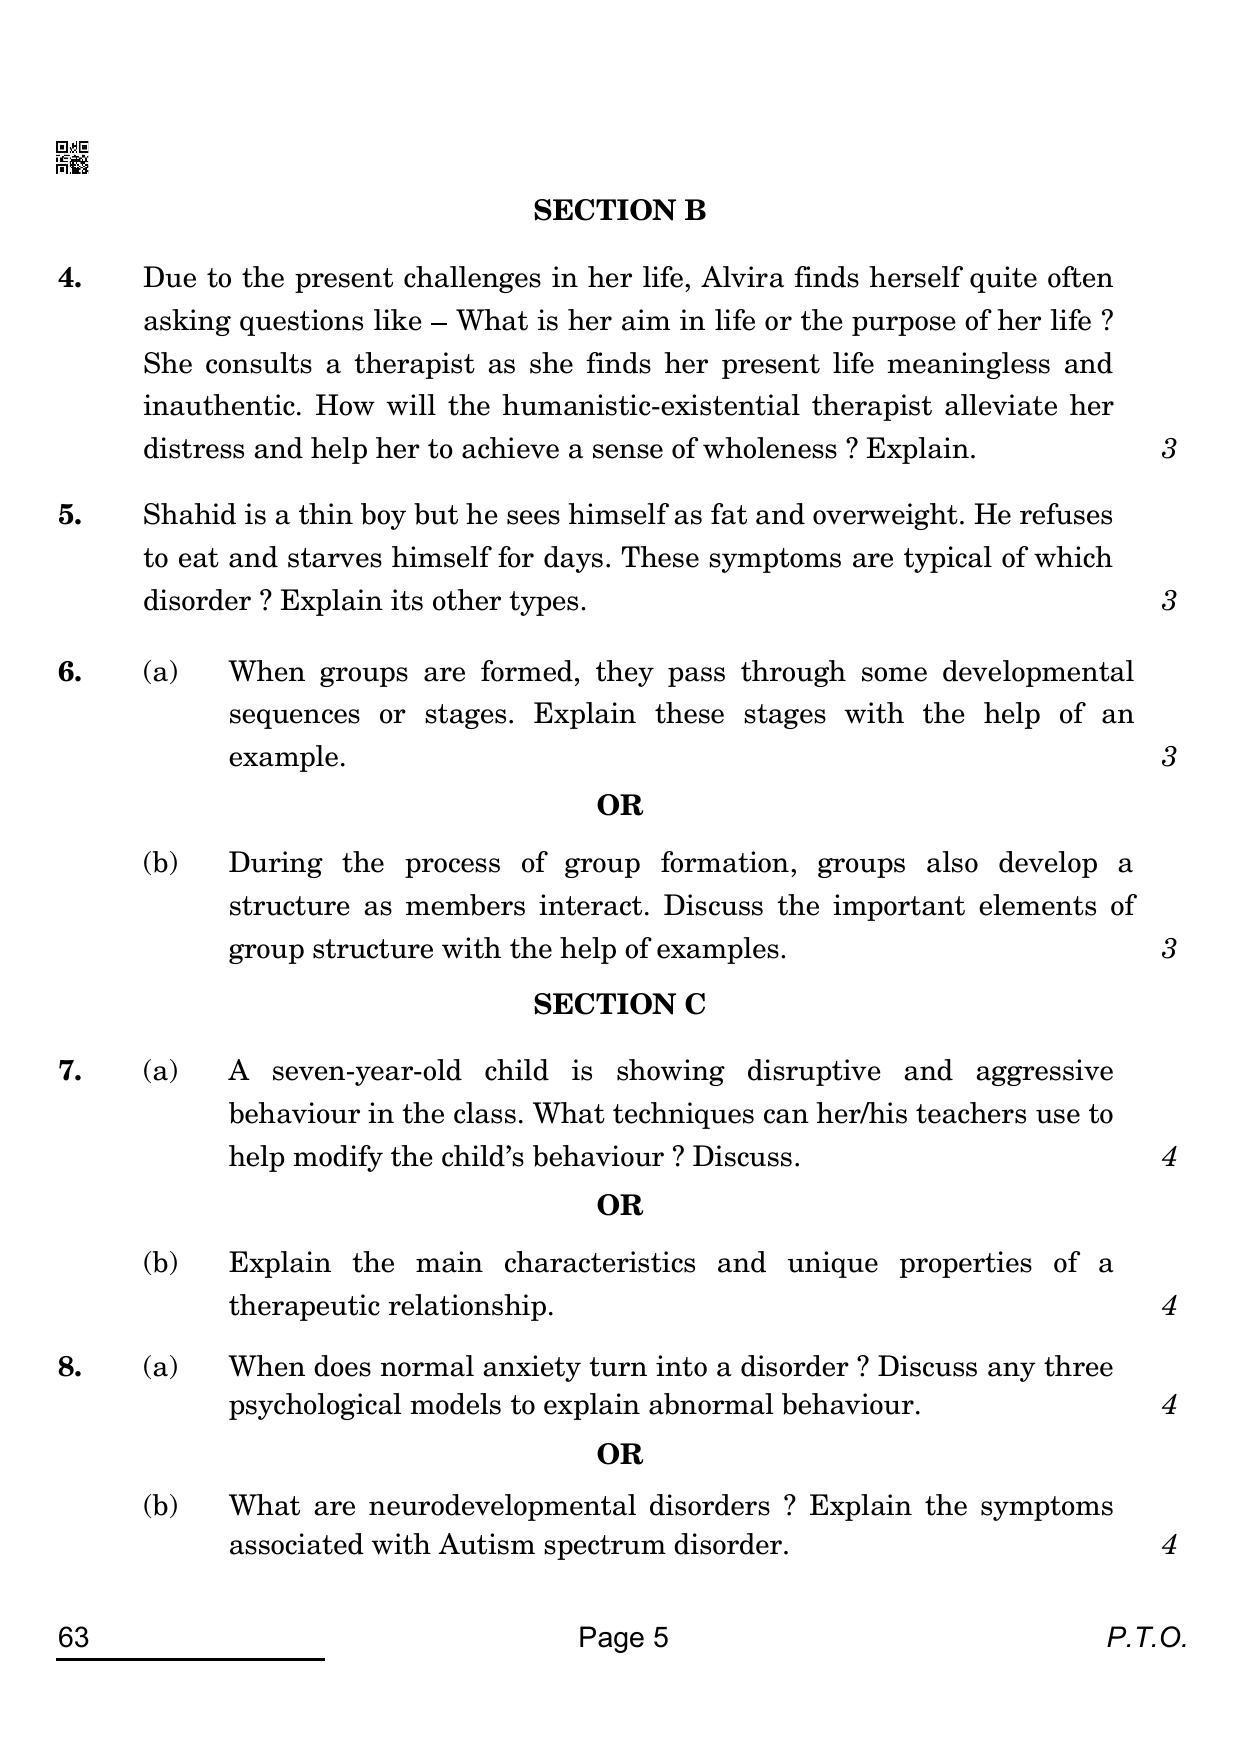 CBSE Class 12 63 Psychology 2022 Compartment Question Paper - Page 5